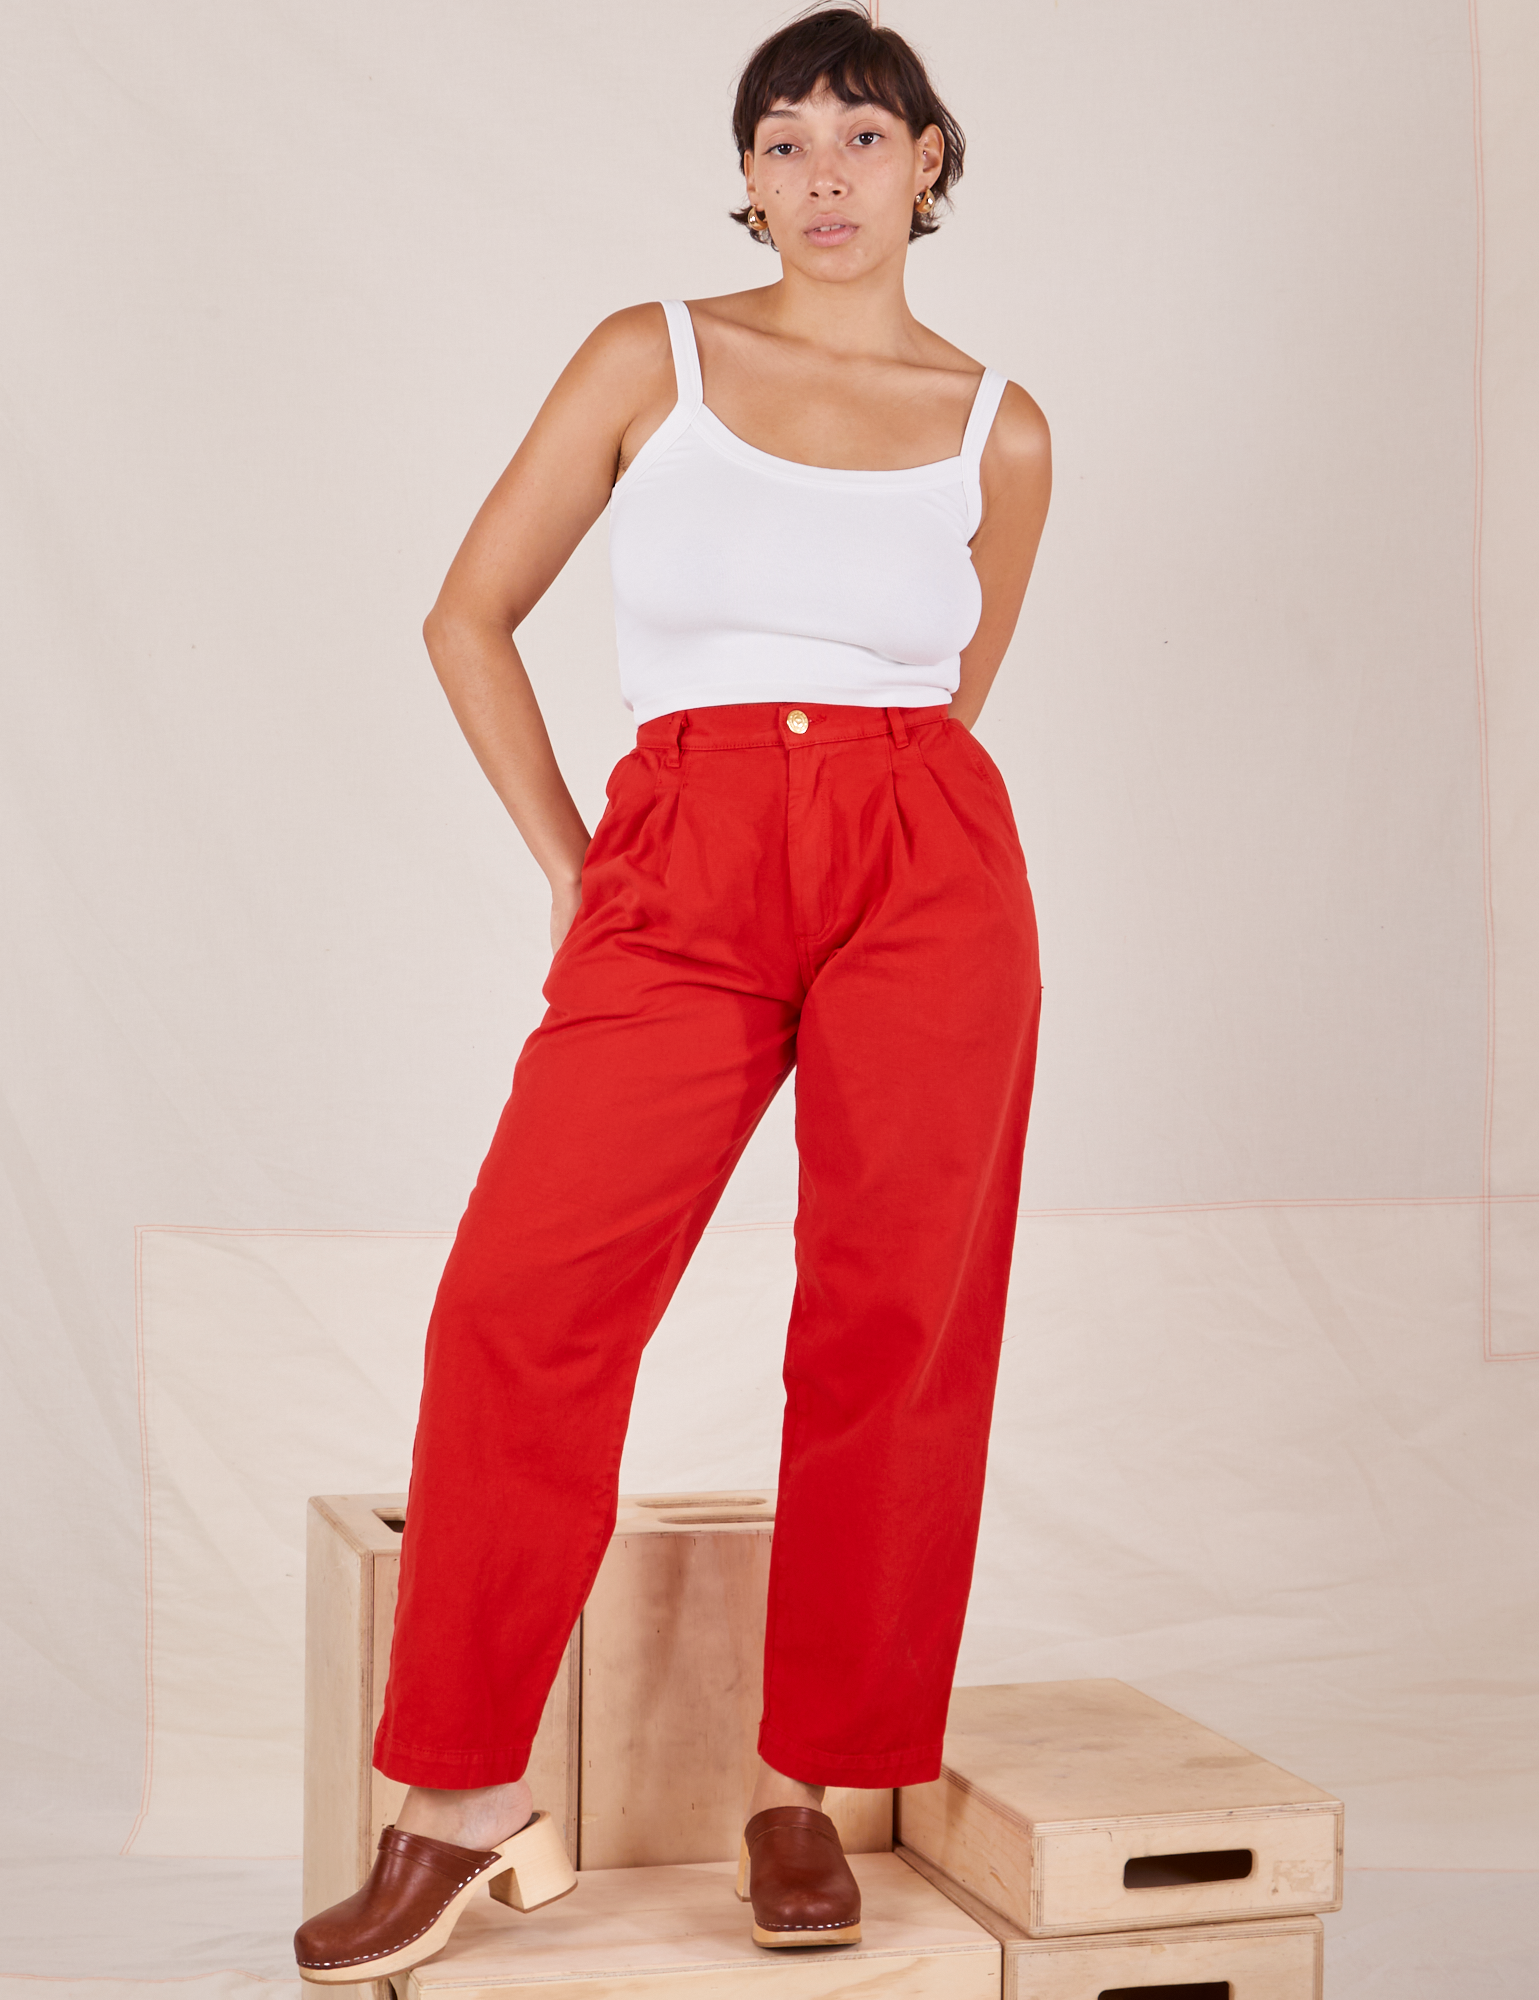 Tiara is 5&#39;4&quot; and wearing S Heavyweight Trousers in Mustang Red paired with vintage off-white Cropped Cami